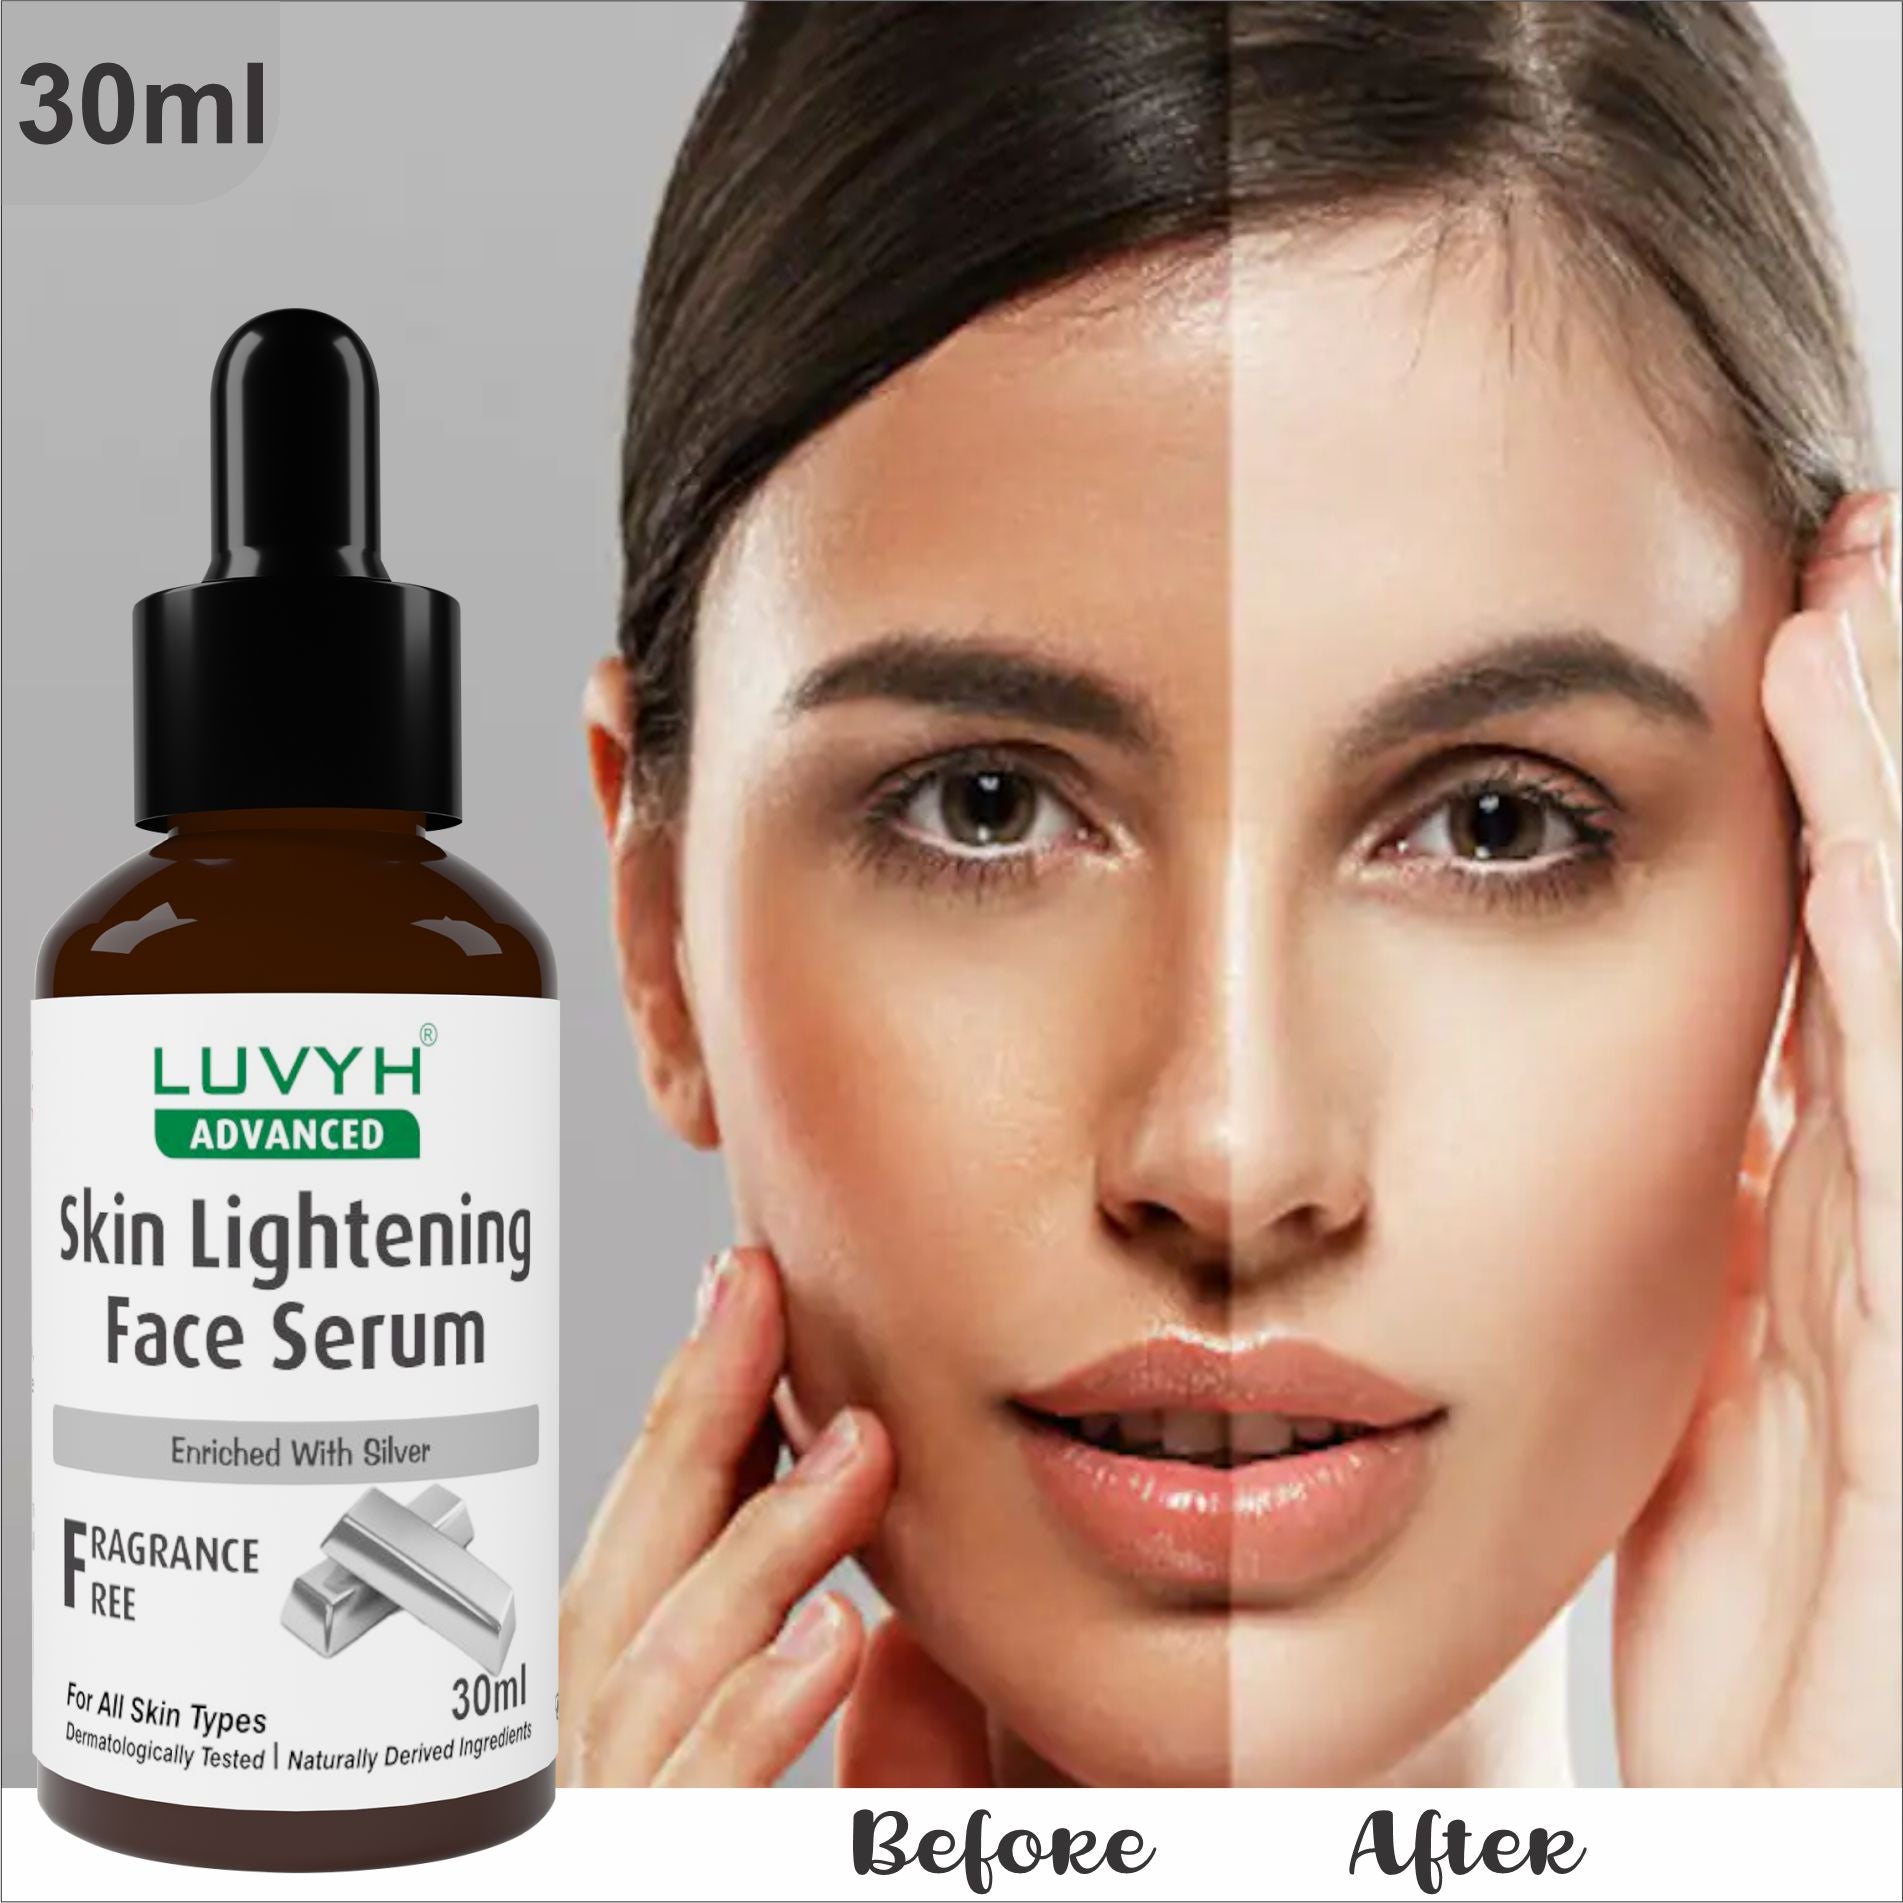 Before and After Results  - Skin Lightening Face  Serum enriched with Silver